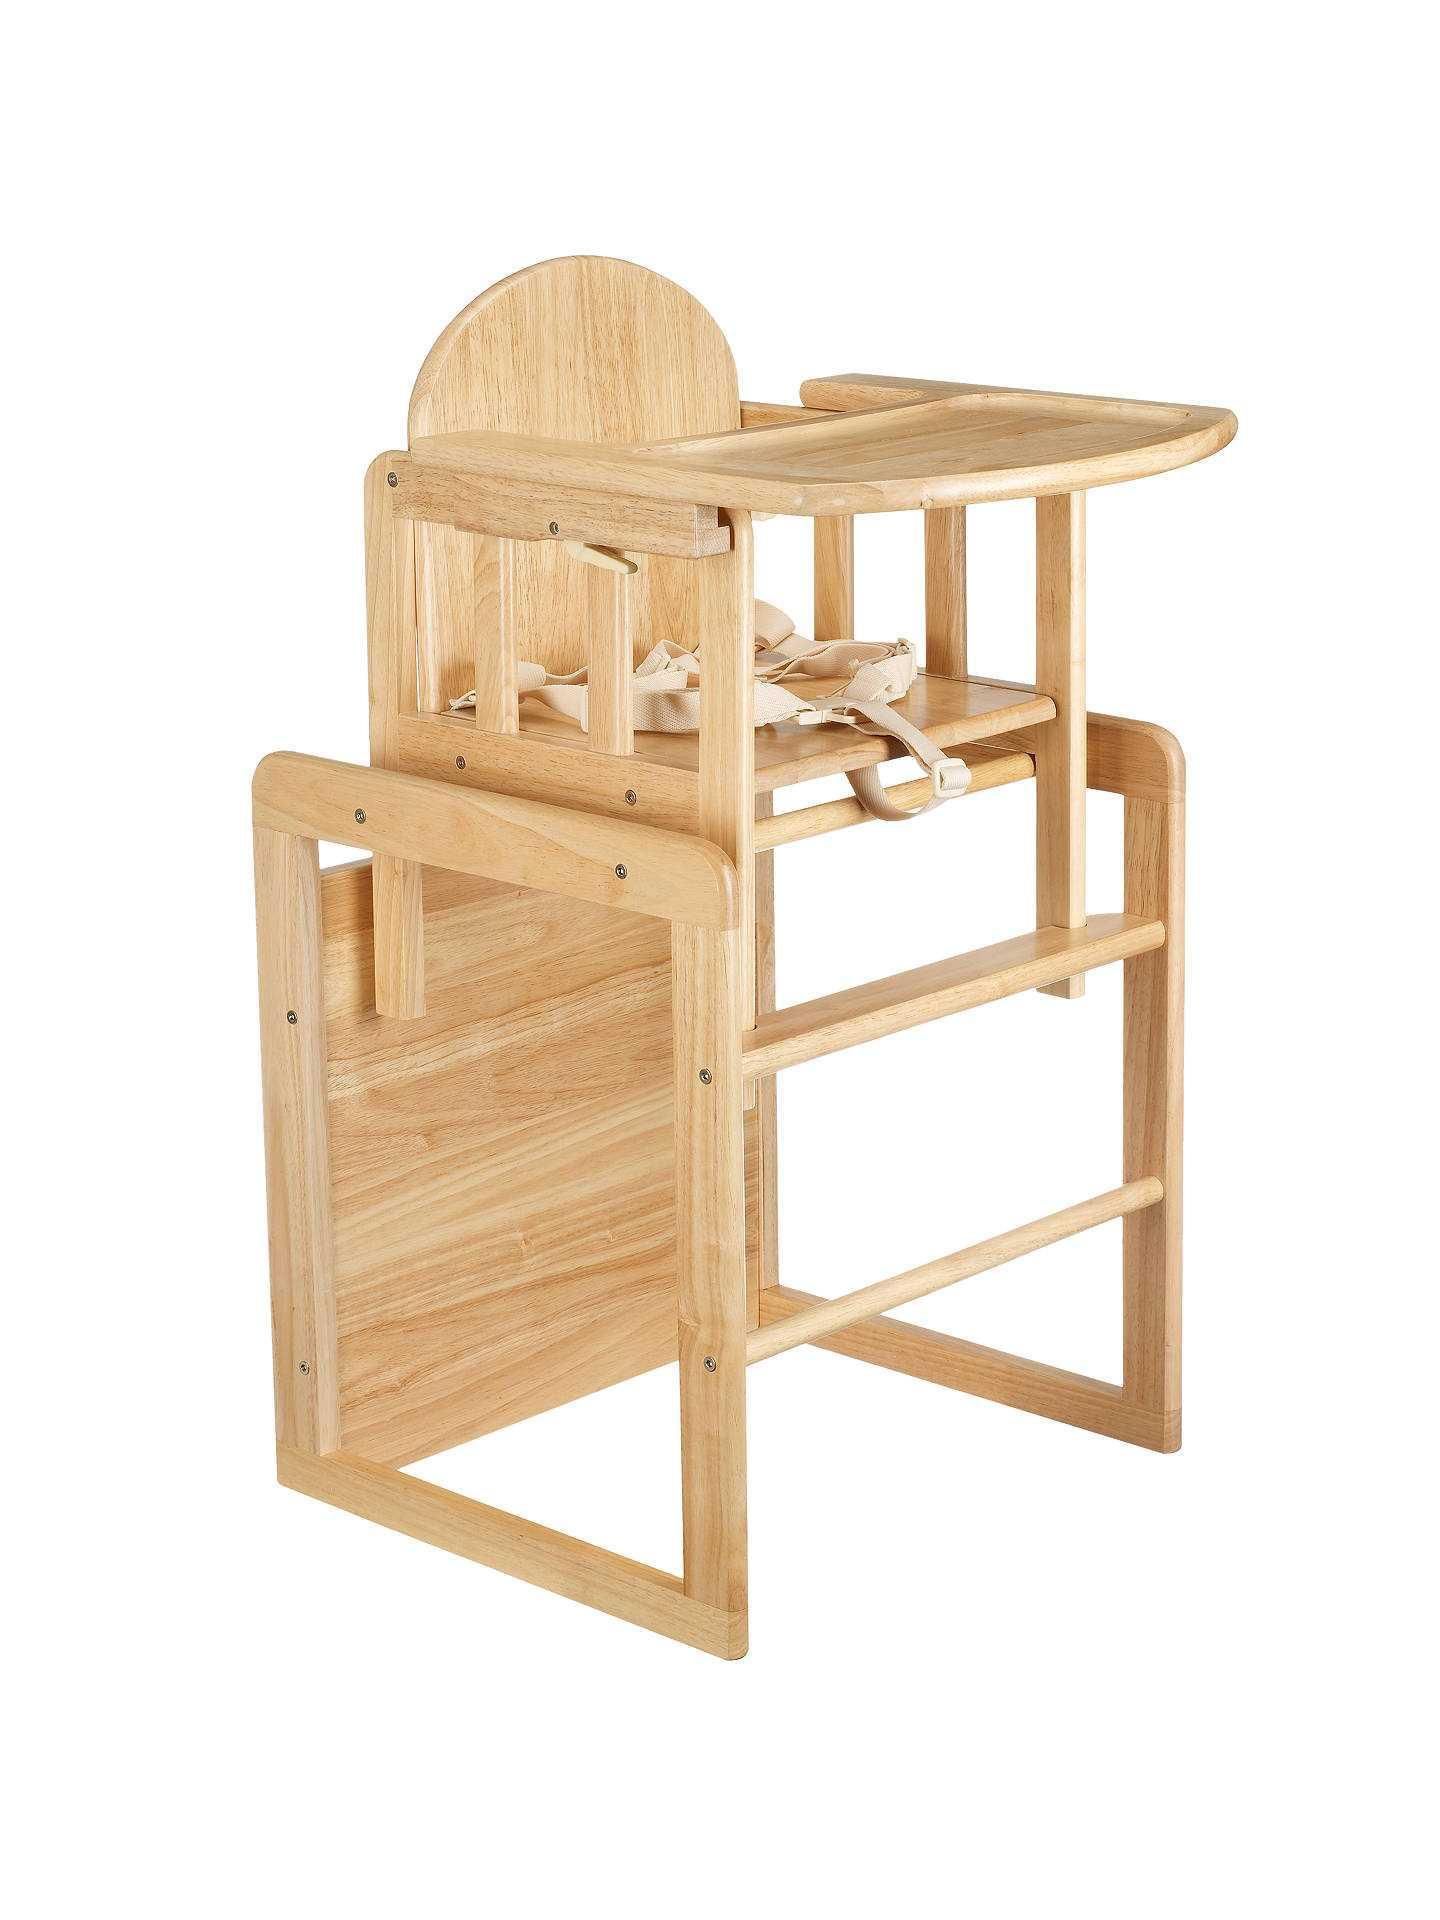 Rrp £75 Boxed East Coast Wooden Combination Highchair